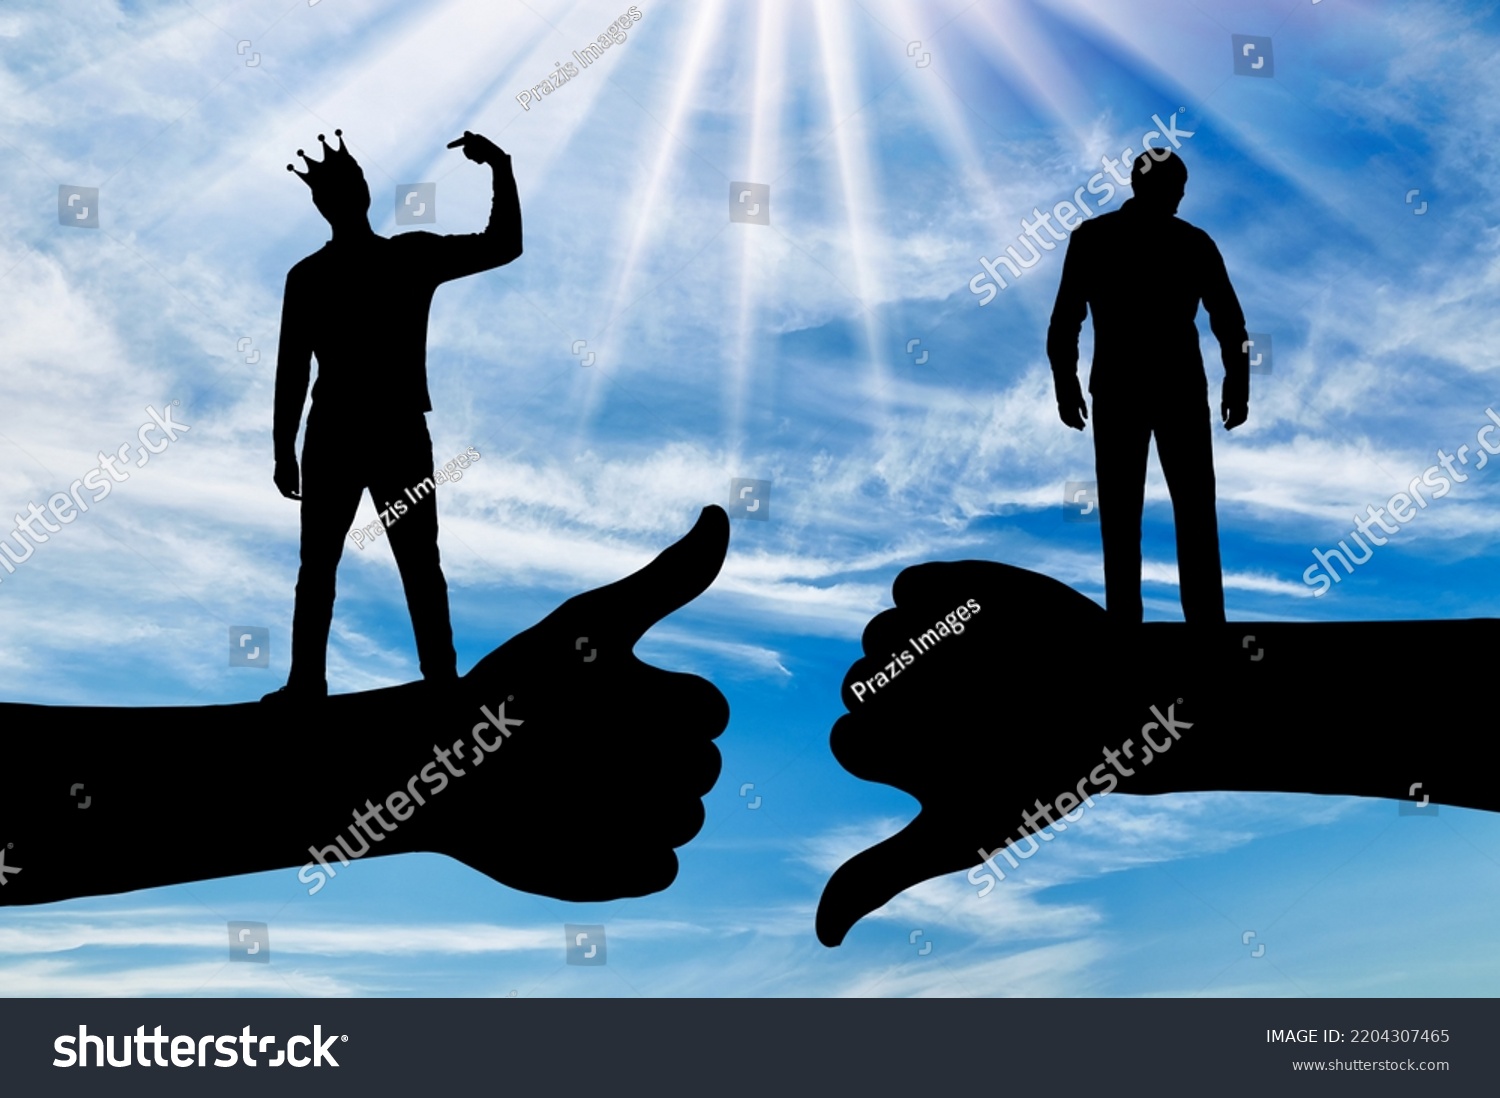 Selfishness and ego. An arrogant selfish man with a crown on his head points his finger at himself, considering himself better than other person. Concept of egoism, arrogance. Silhouette #2204307465